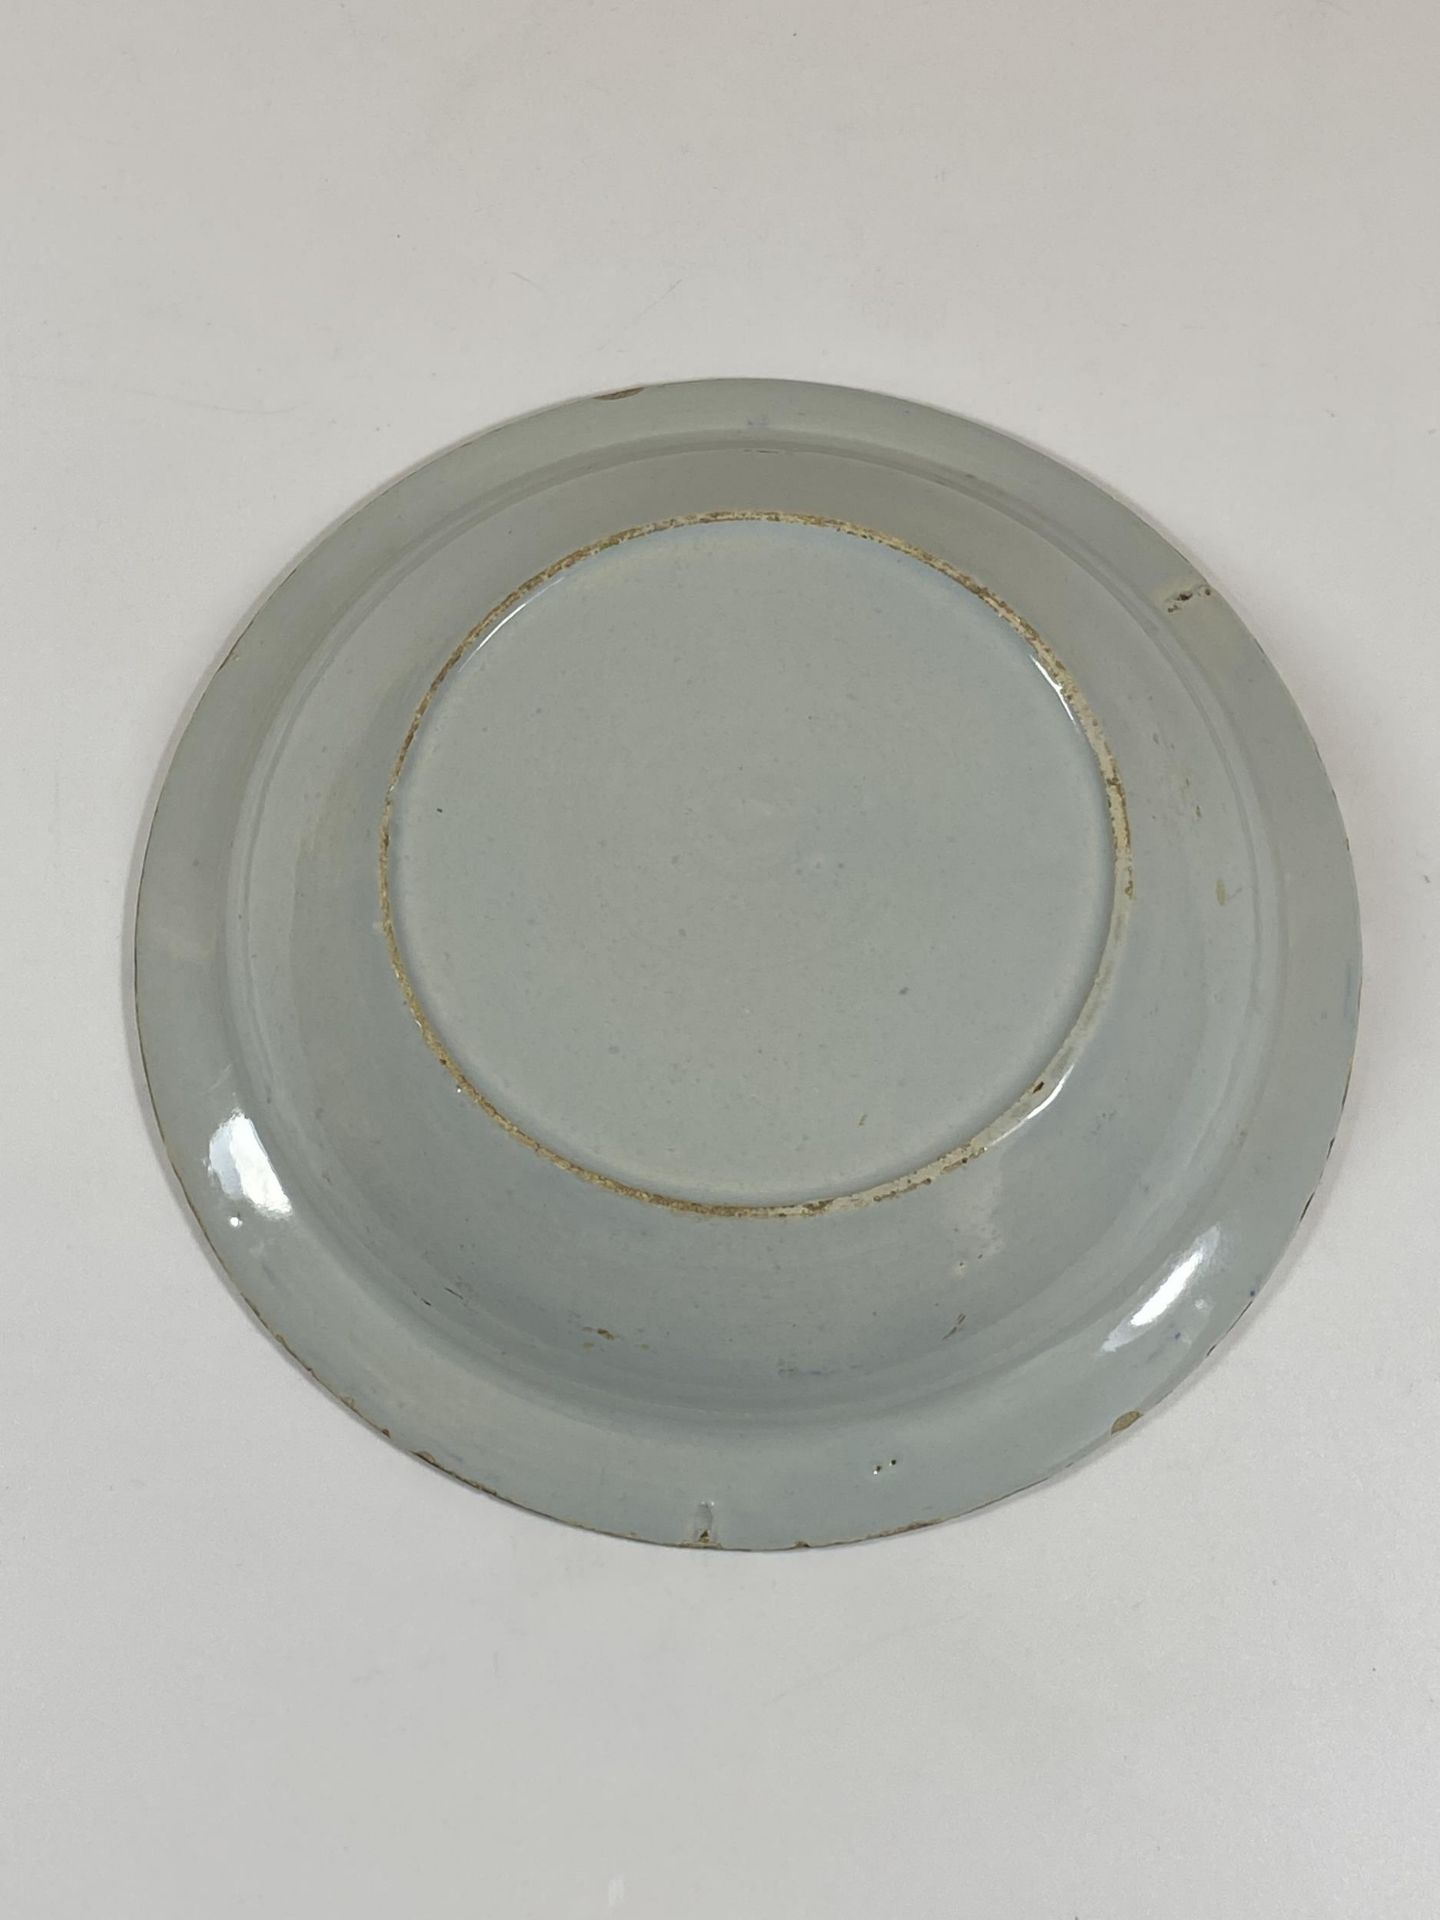 AN EARLY 19TH CENTURY DELFT ORIENTAL DESIGN BLUE AND WHITE PORCELAIN PLATE, DIAMETER 16.5CM - Image 4 of 6